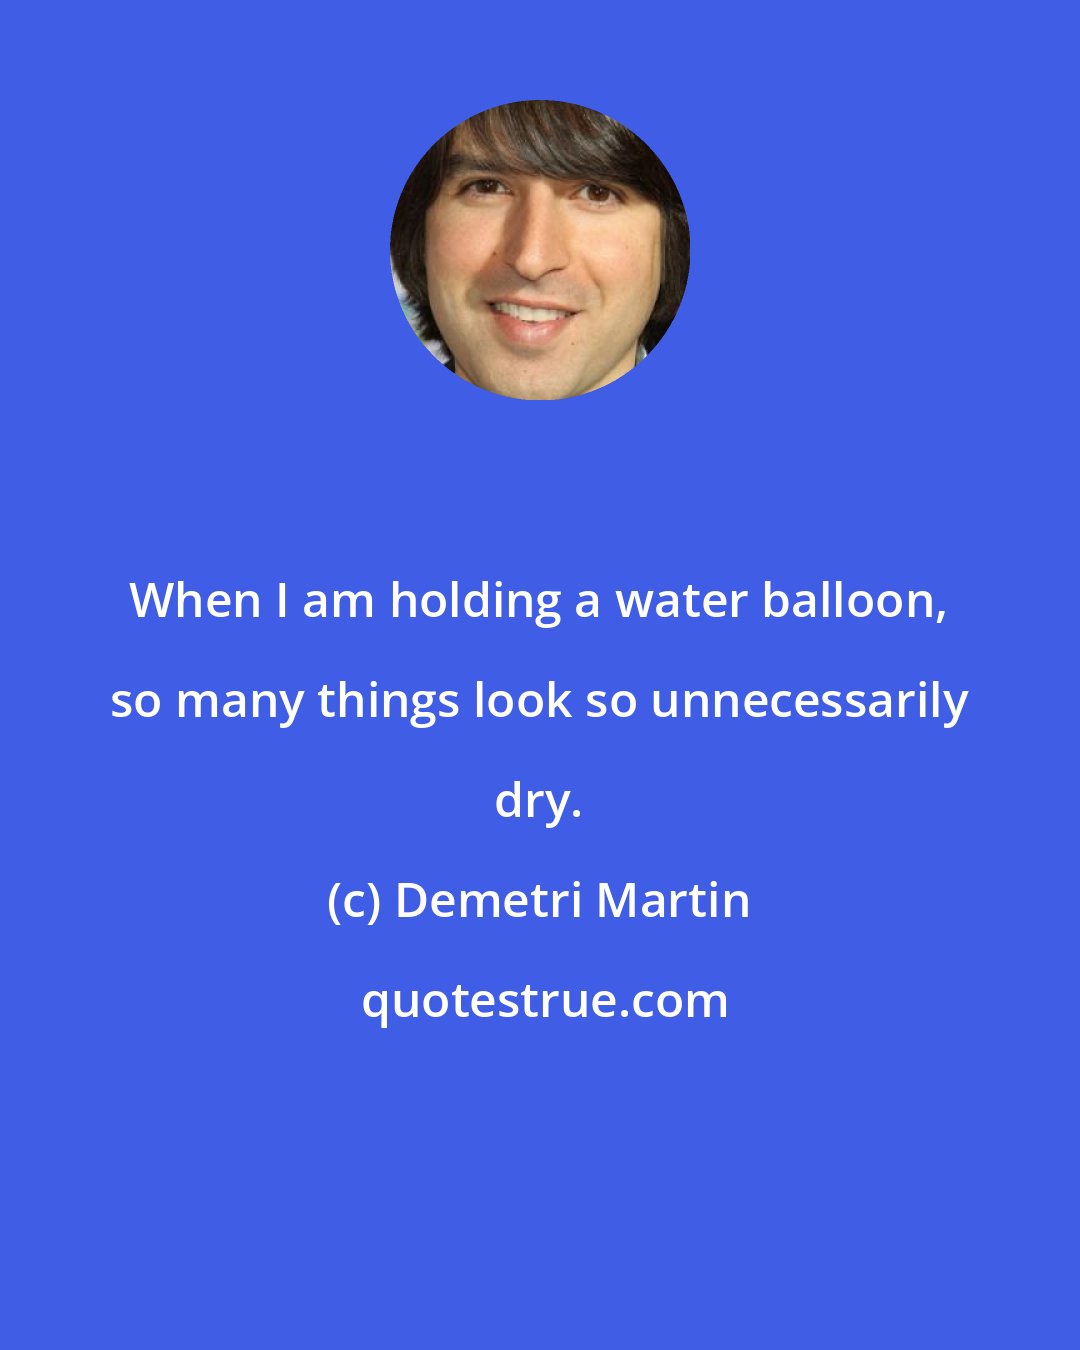 Demetri Martin: When I am holding a water balloon, so many things look so unnecessarily dry.